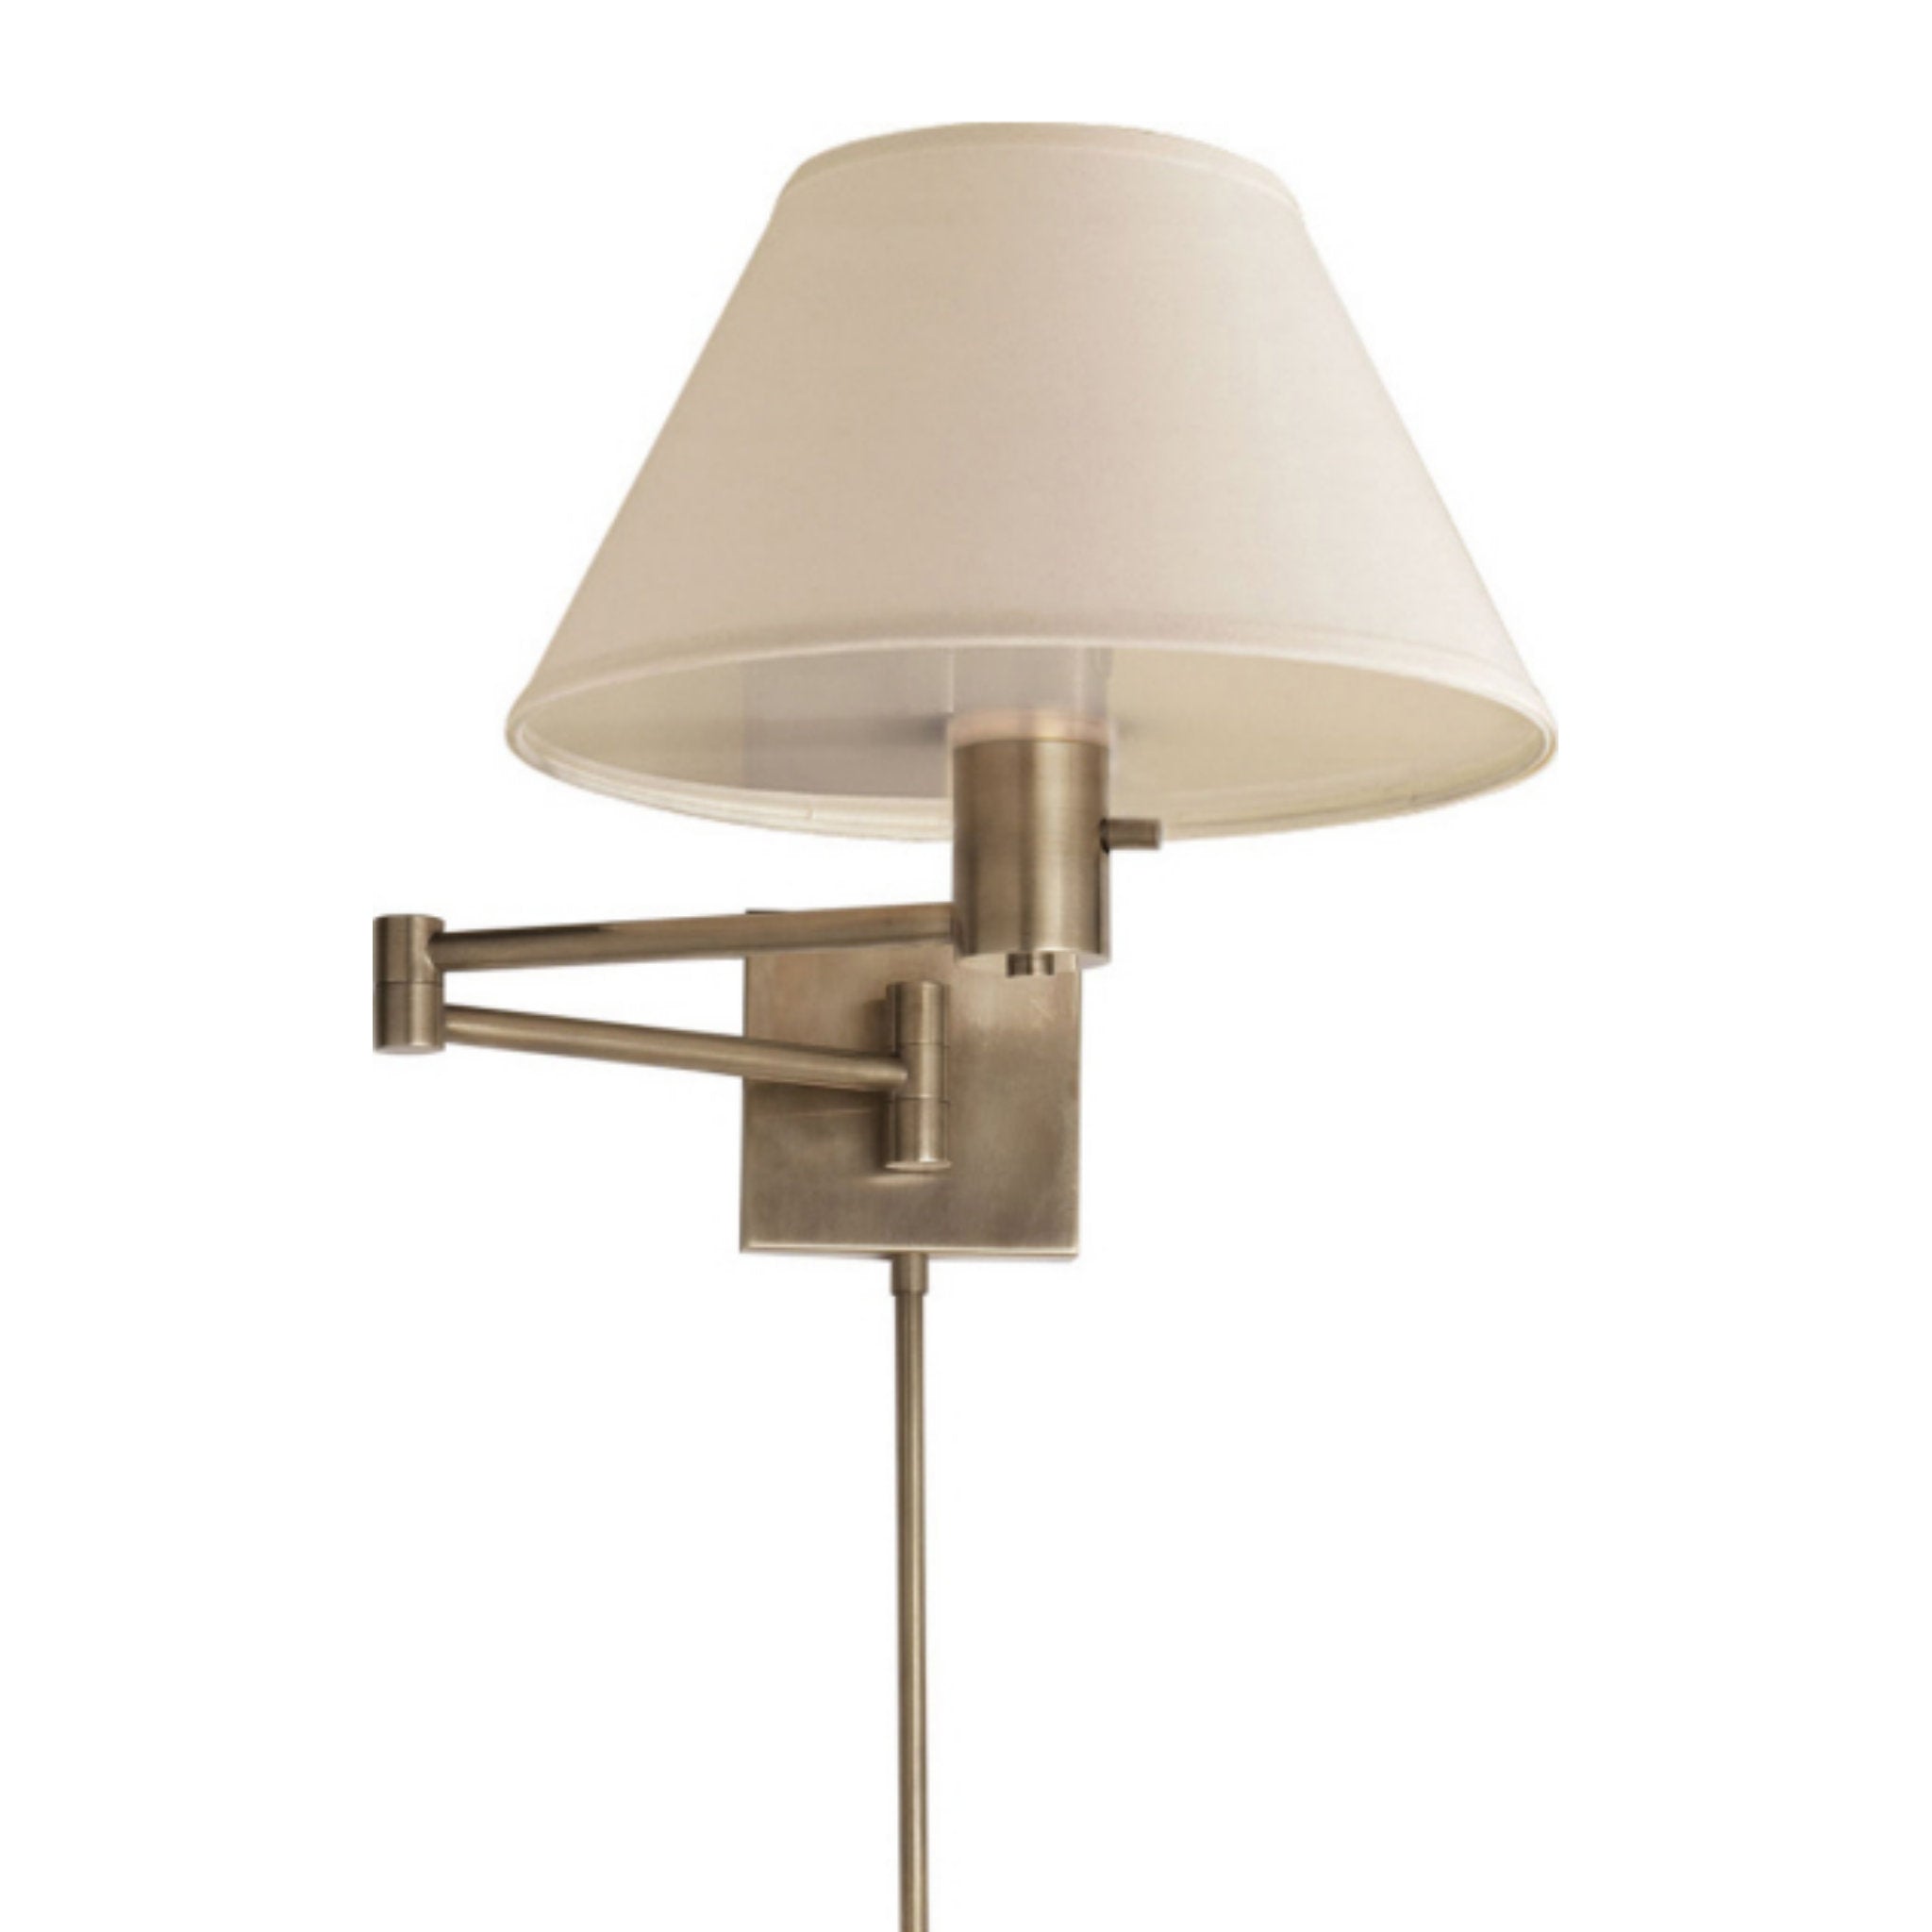 Visual Comfort Classic Swing Arm Wall Lamp in Antique Nickel with Linen Shade